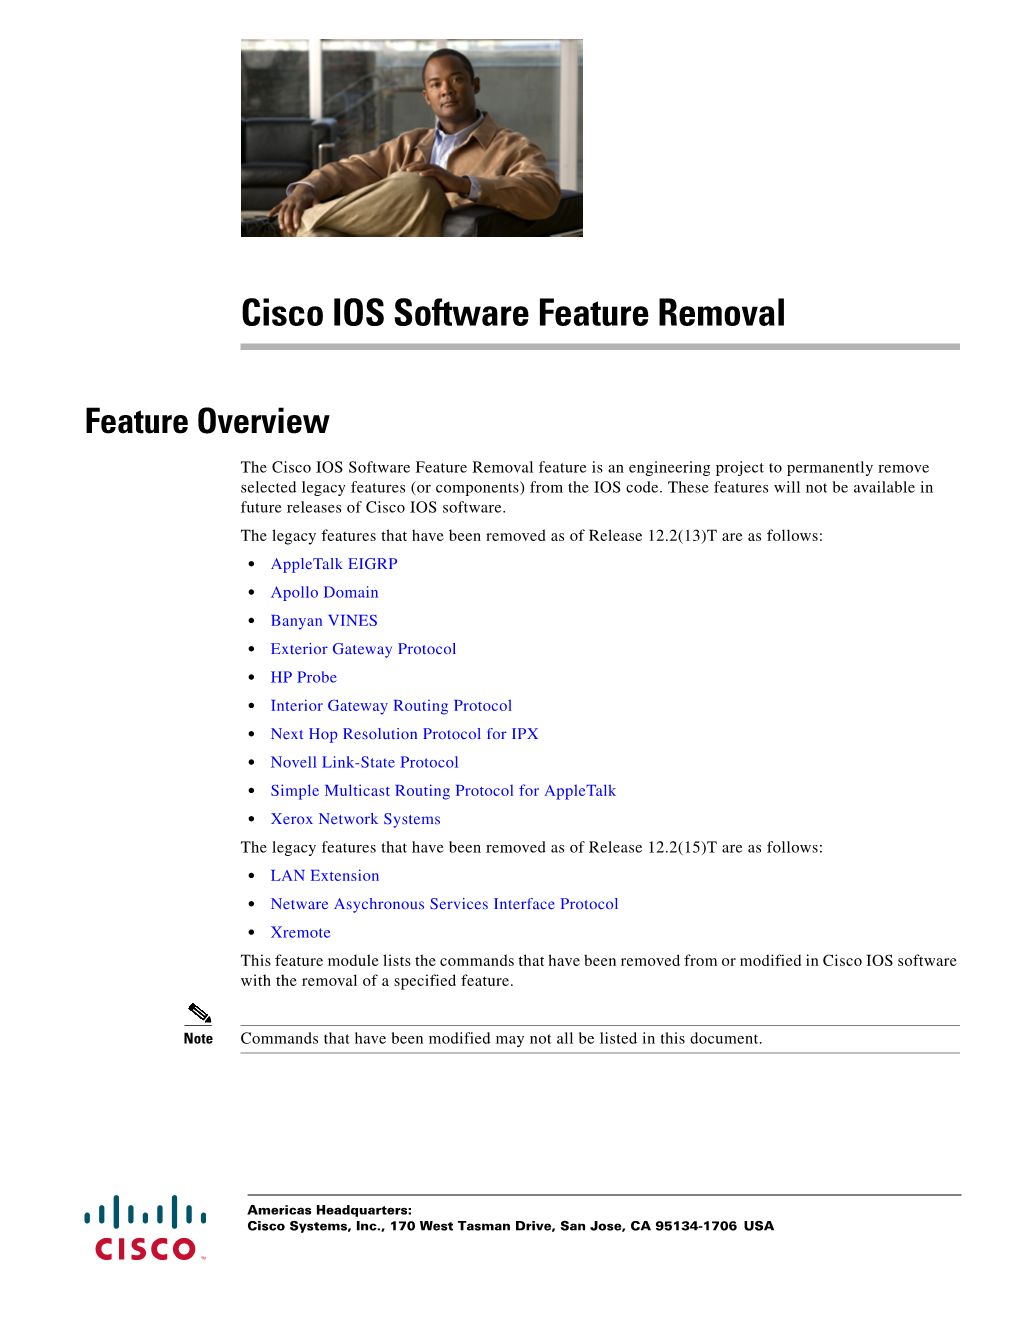 Cisco IOS Software Feature Removal